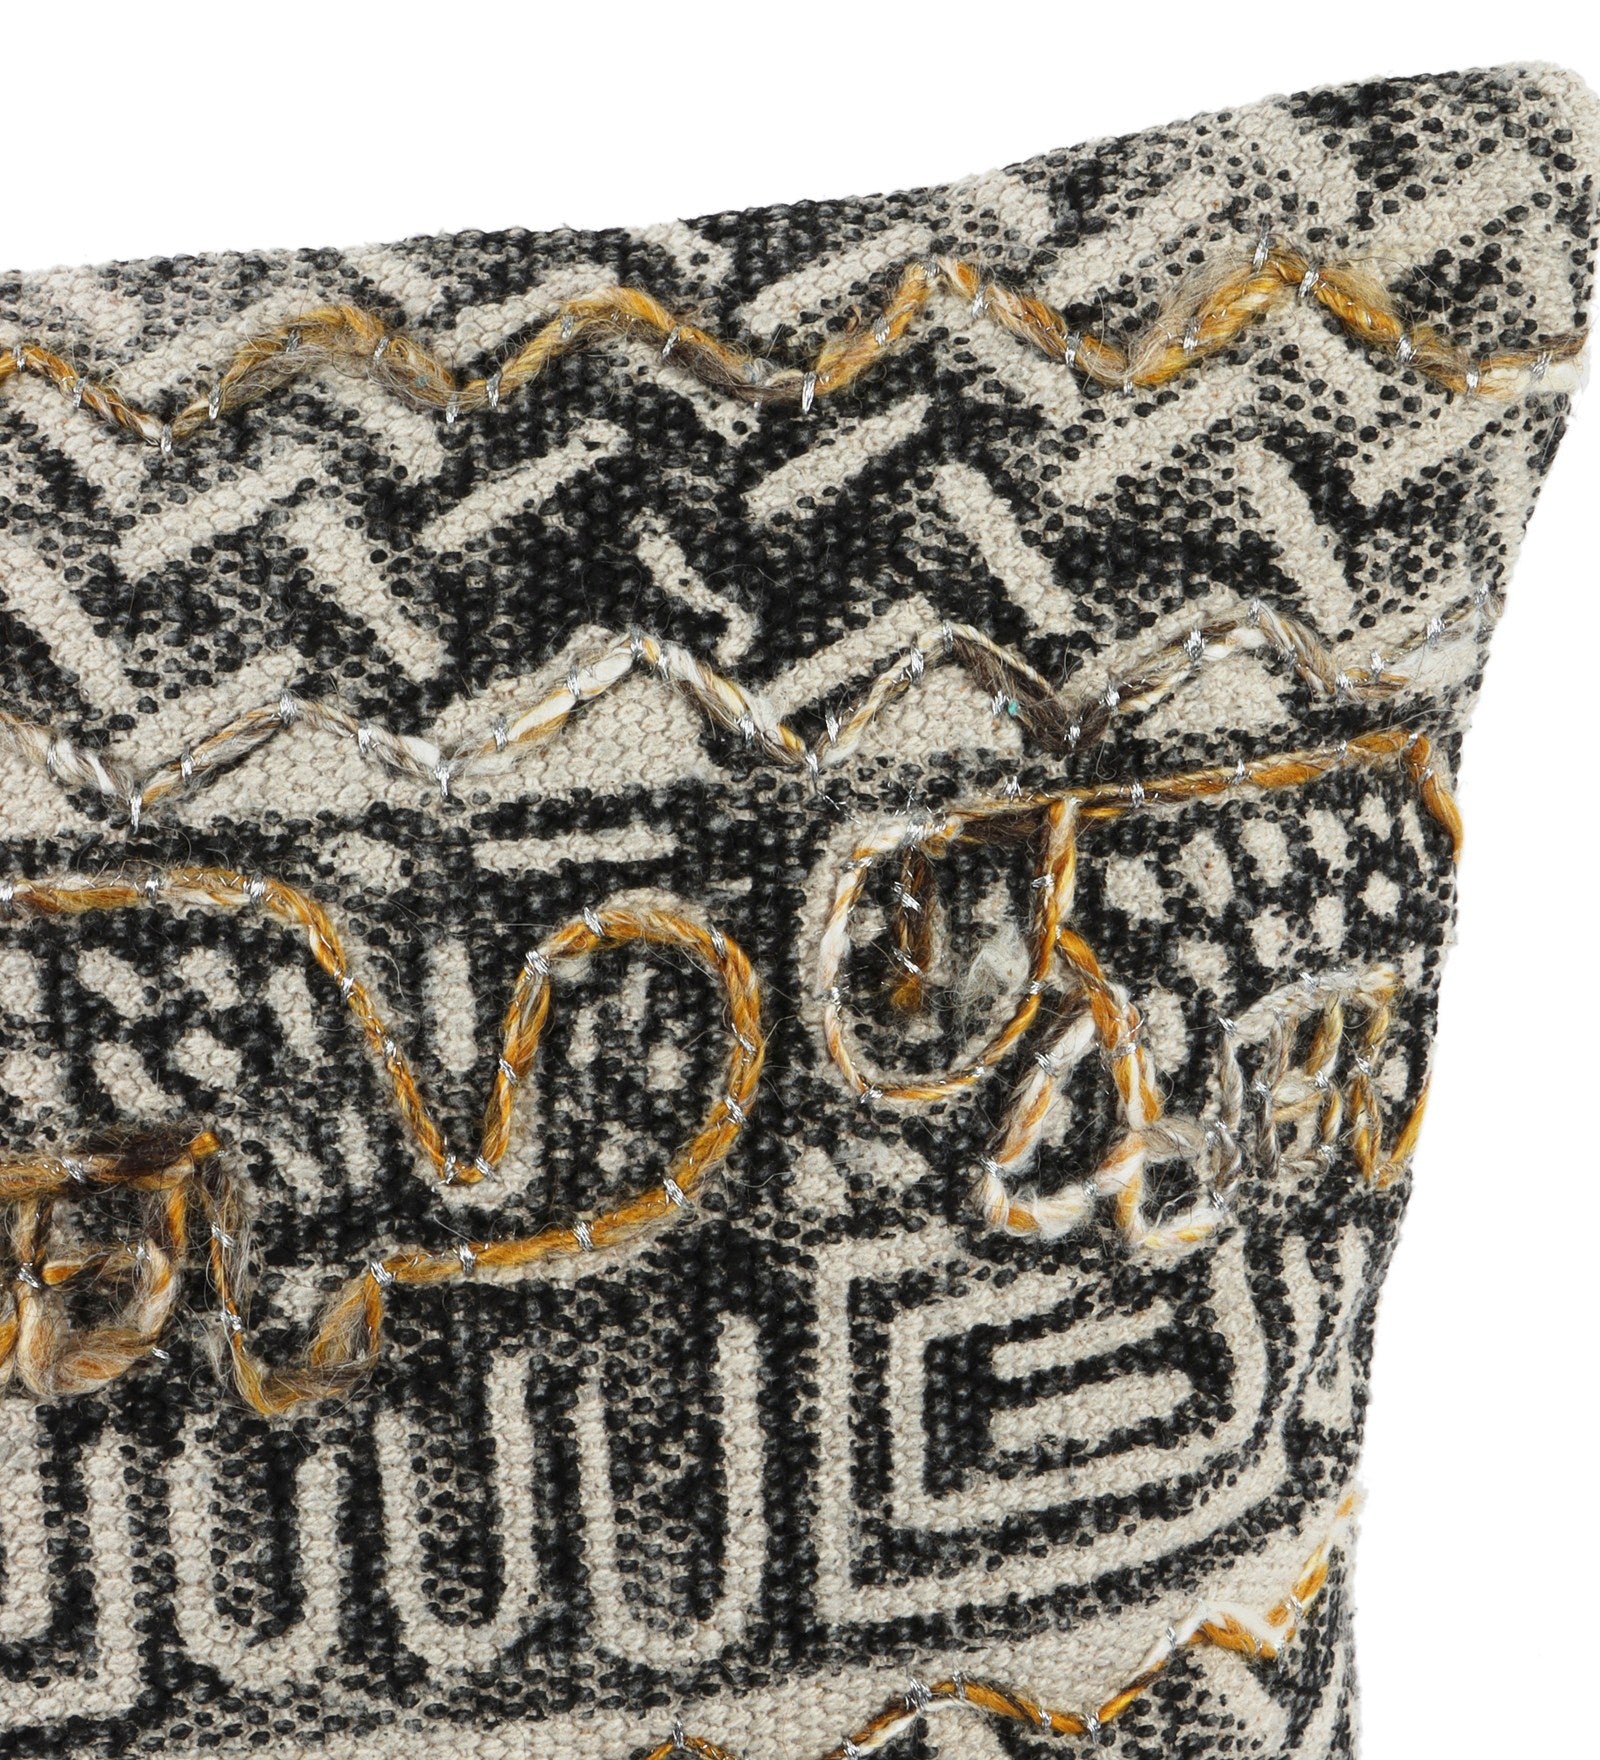 Embroidered Contemporary Cushion Cover (Black-Beige Abstract)